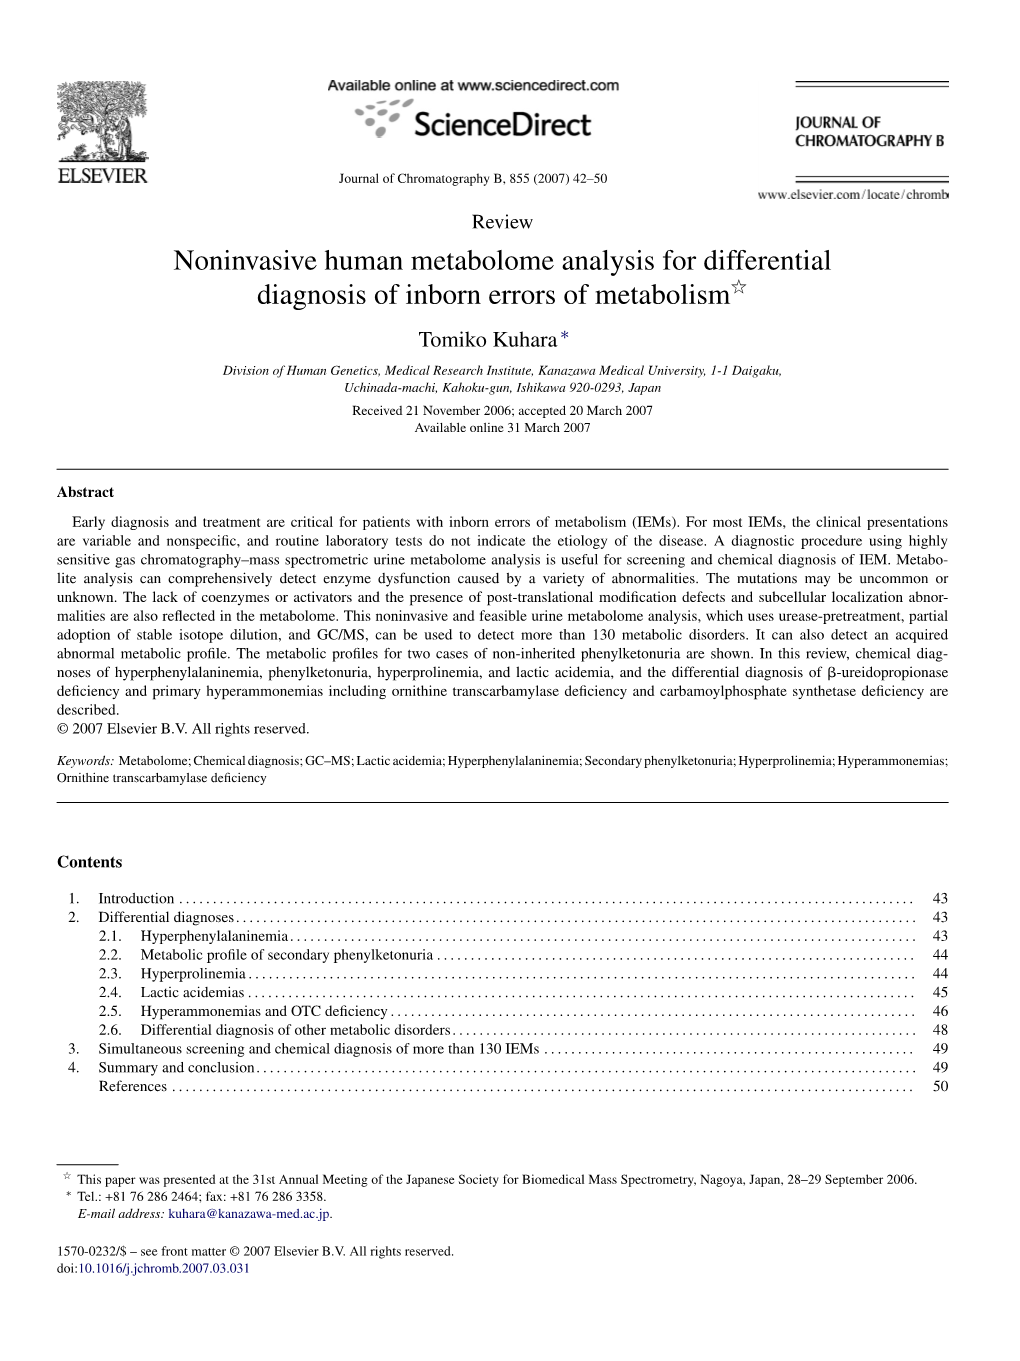 Noninvasive Human Metabolome Analysis for Differential